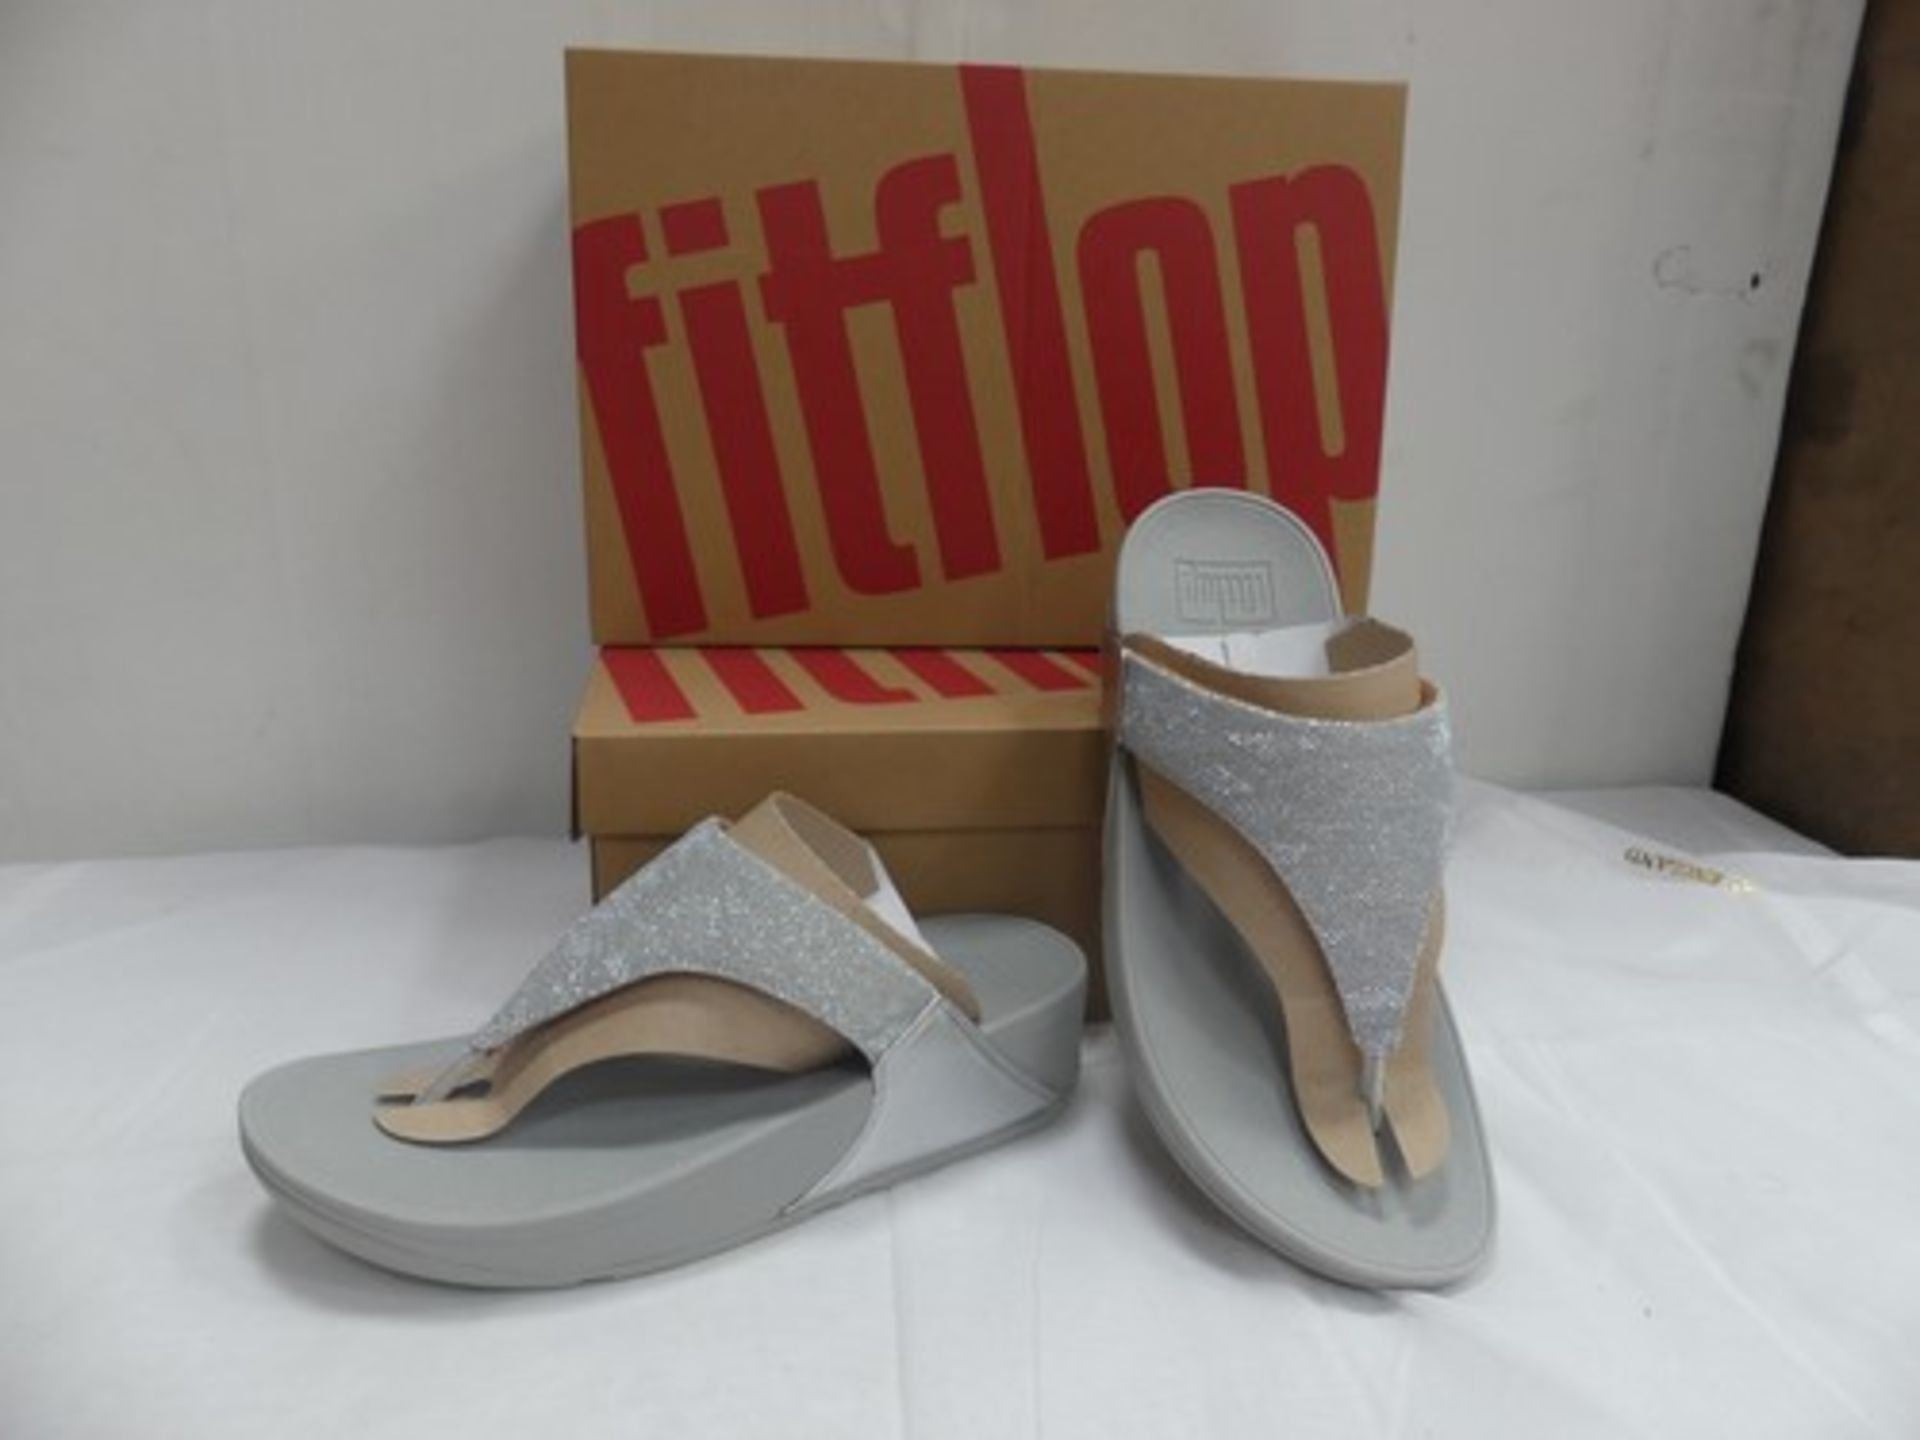 2 x pairs of Fitflop's Lulu Glutz post silver sandals, 1 x size 6 and 1 x size 7 - New in tatty